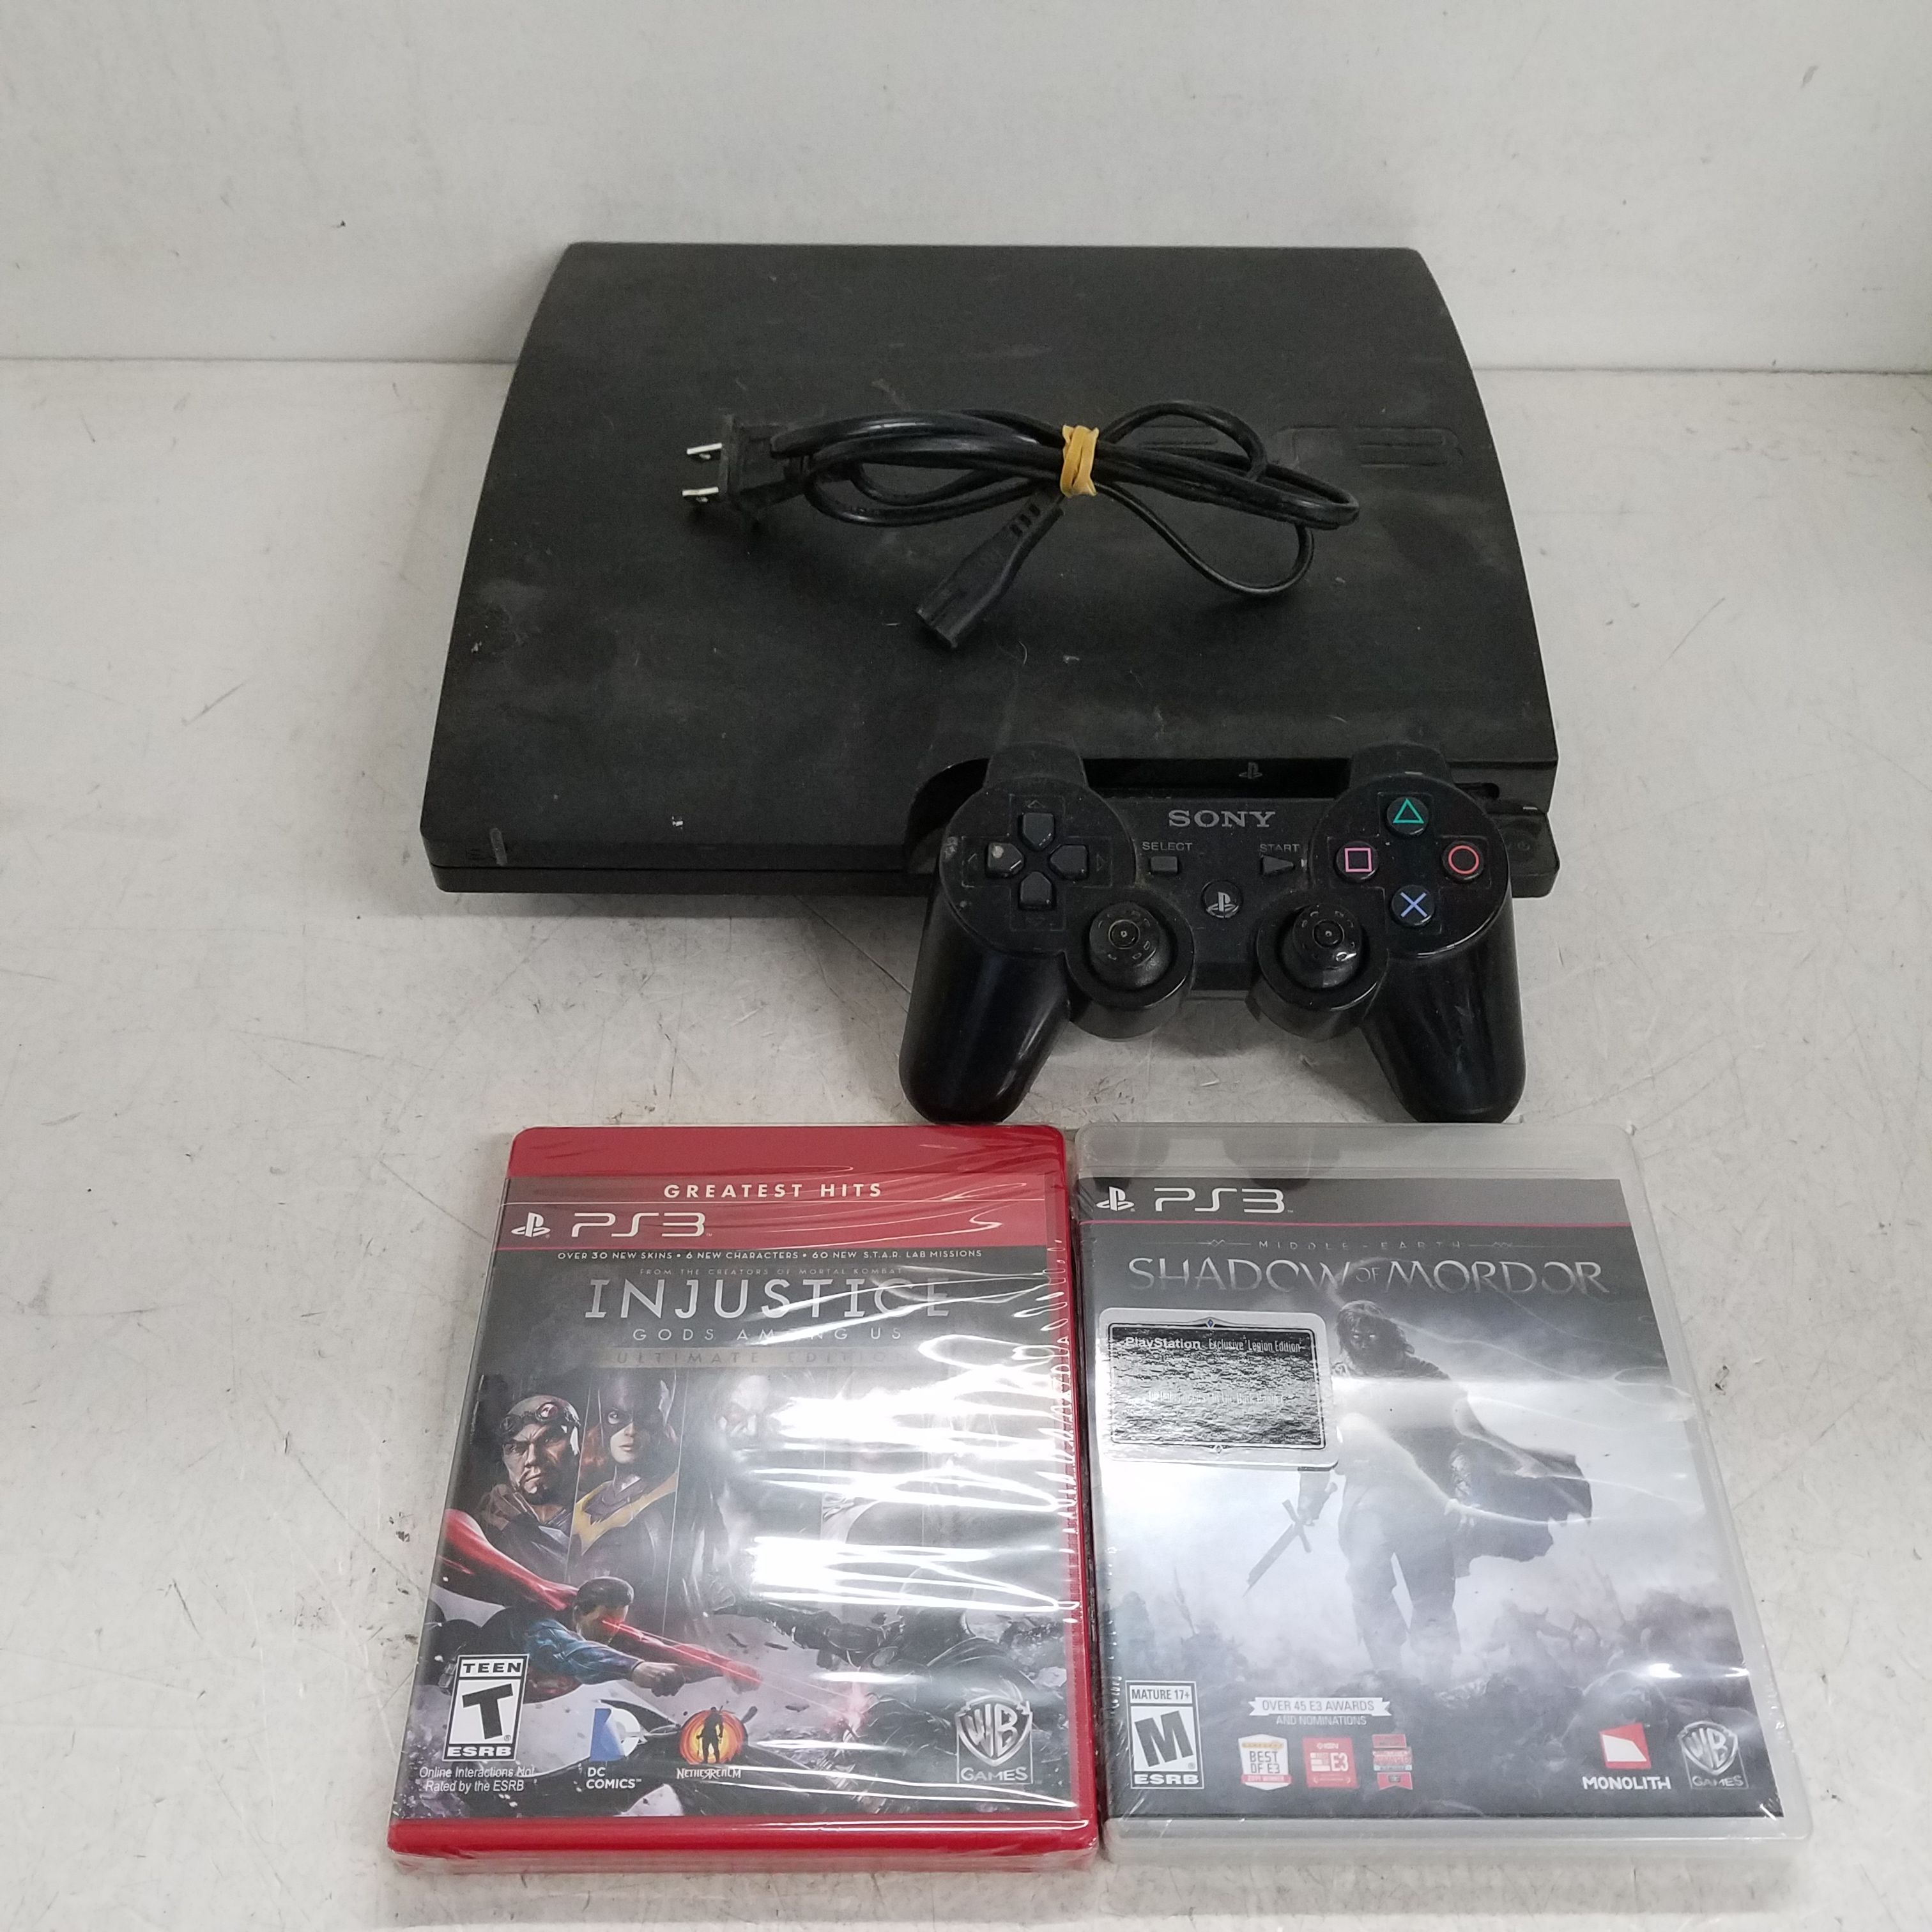 Playstation 3 Slim 320gb + 2 Controllers With 20 Games